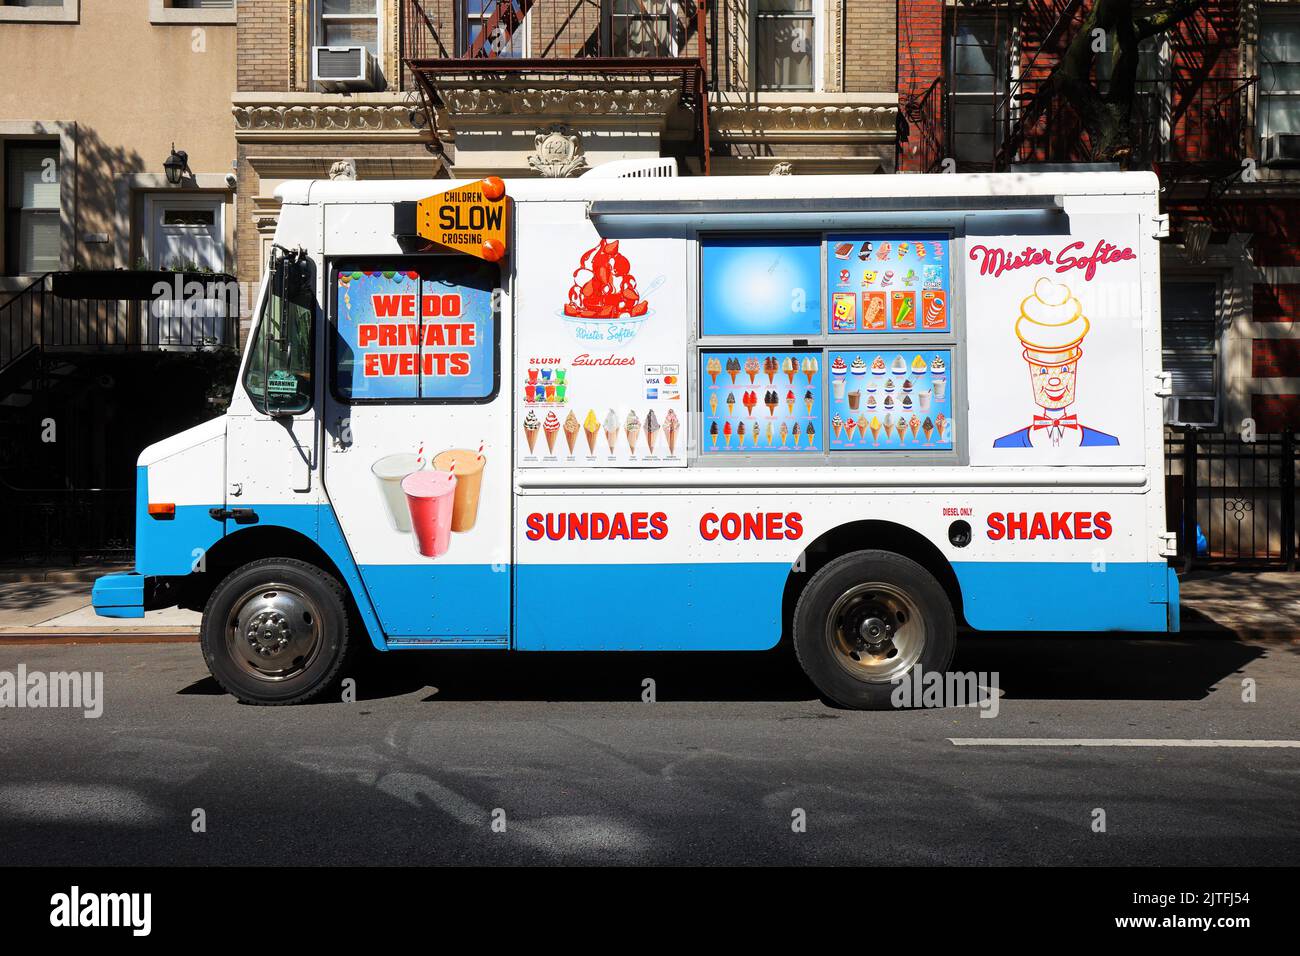 A Mister Softee soft ice cream truck parked on a New York Street in sunlight. Stock Photo